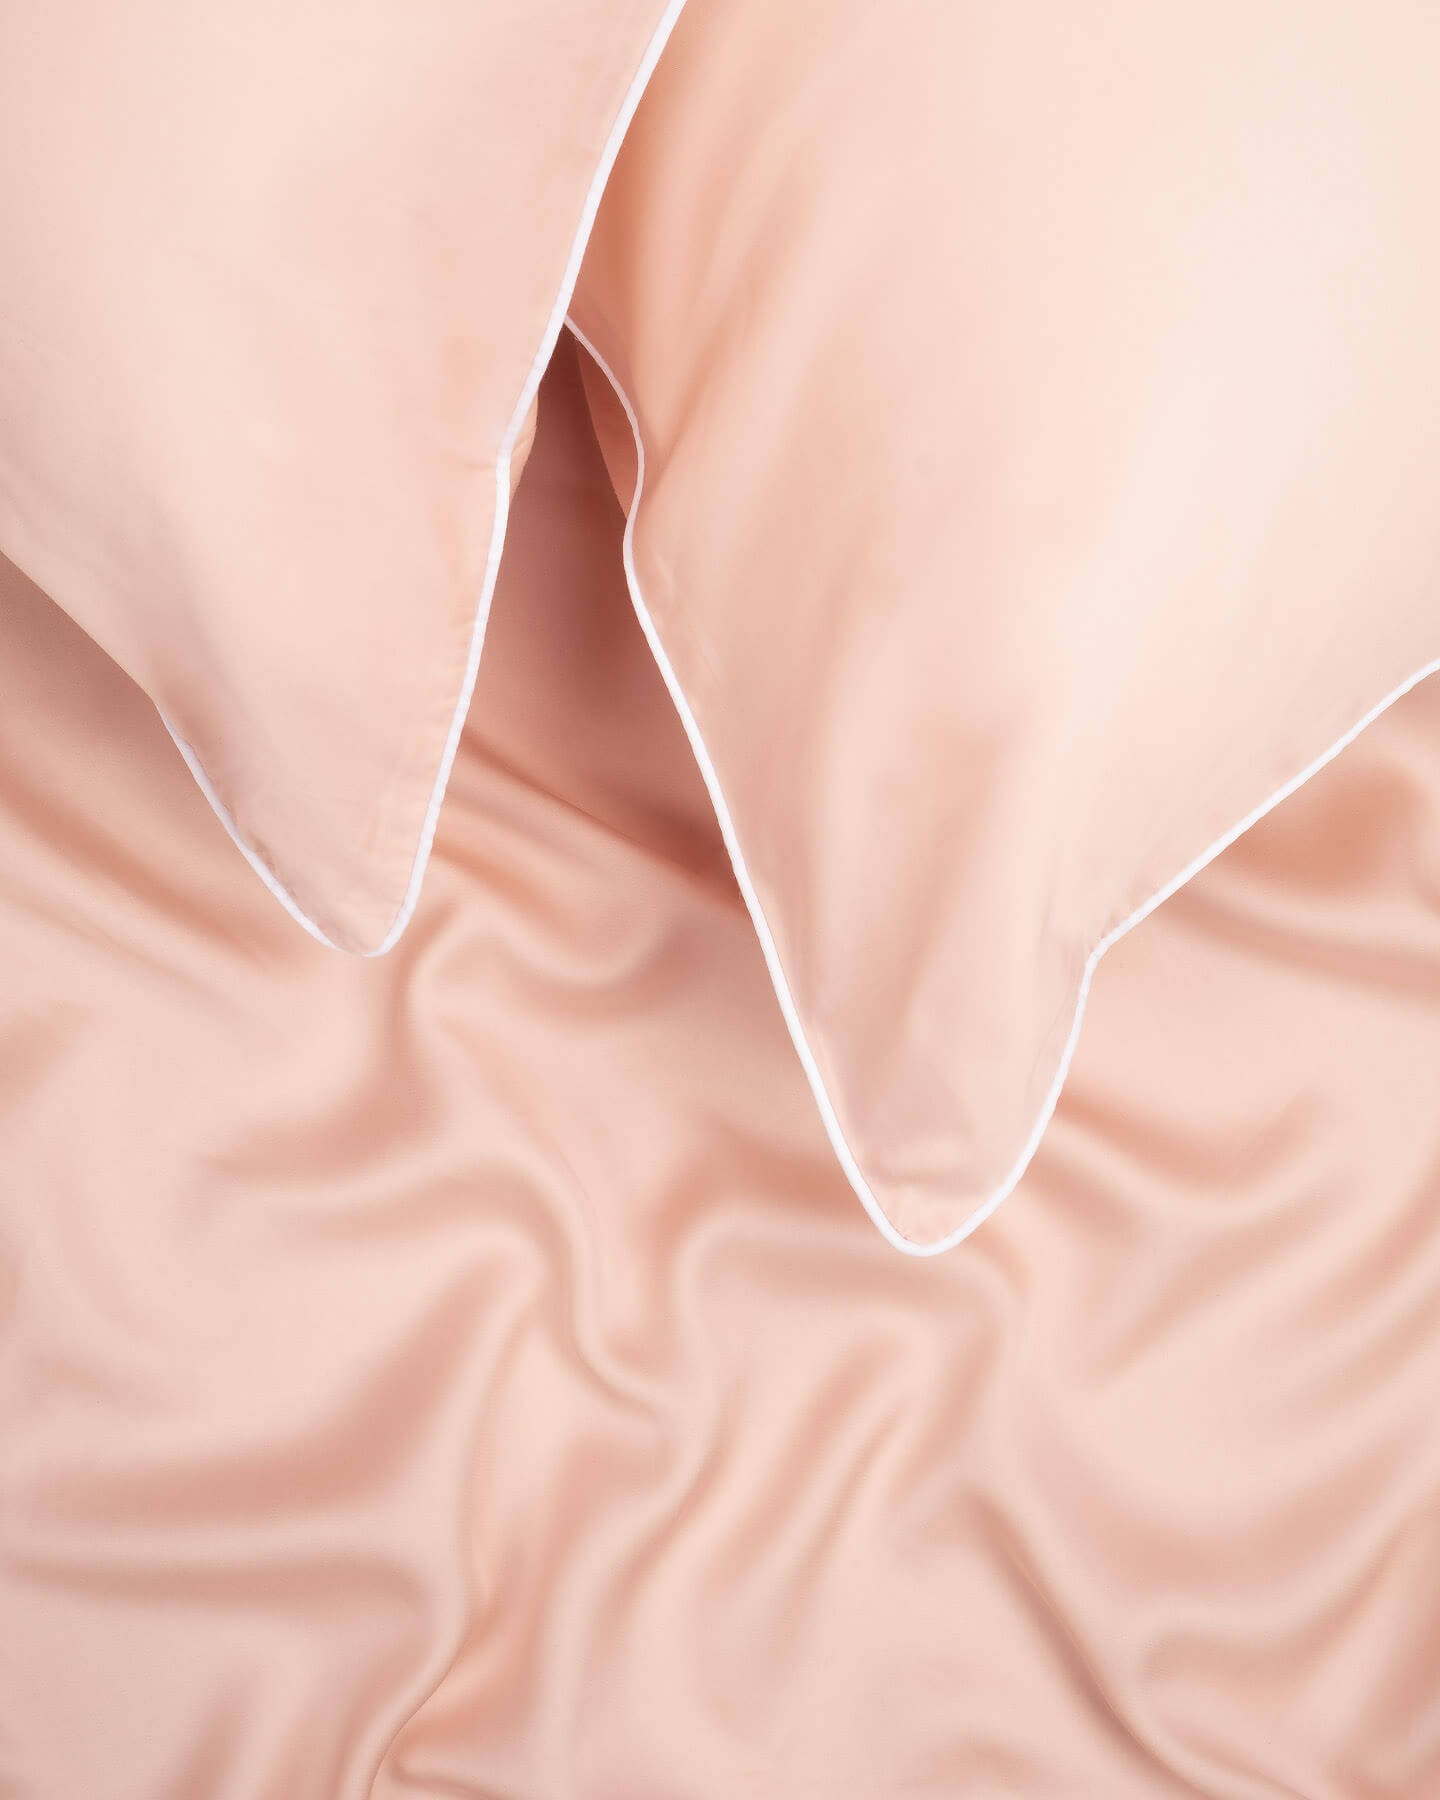 organic bamboo lyocell sheet set (2 pillowcases 1 fitted sheet) in daydream blush (pink with white piping). ava and ava ph soft, cooling, breathable bed sheets.